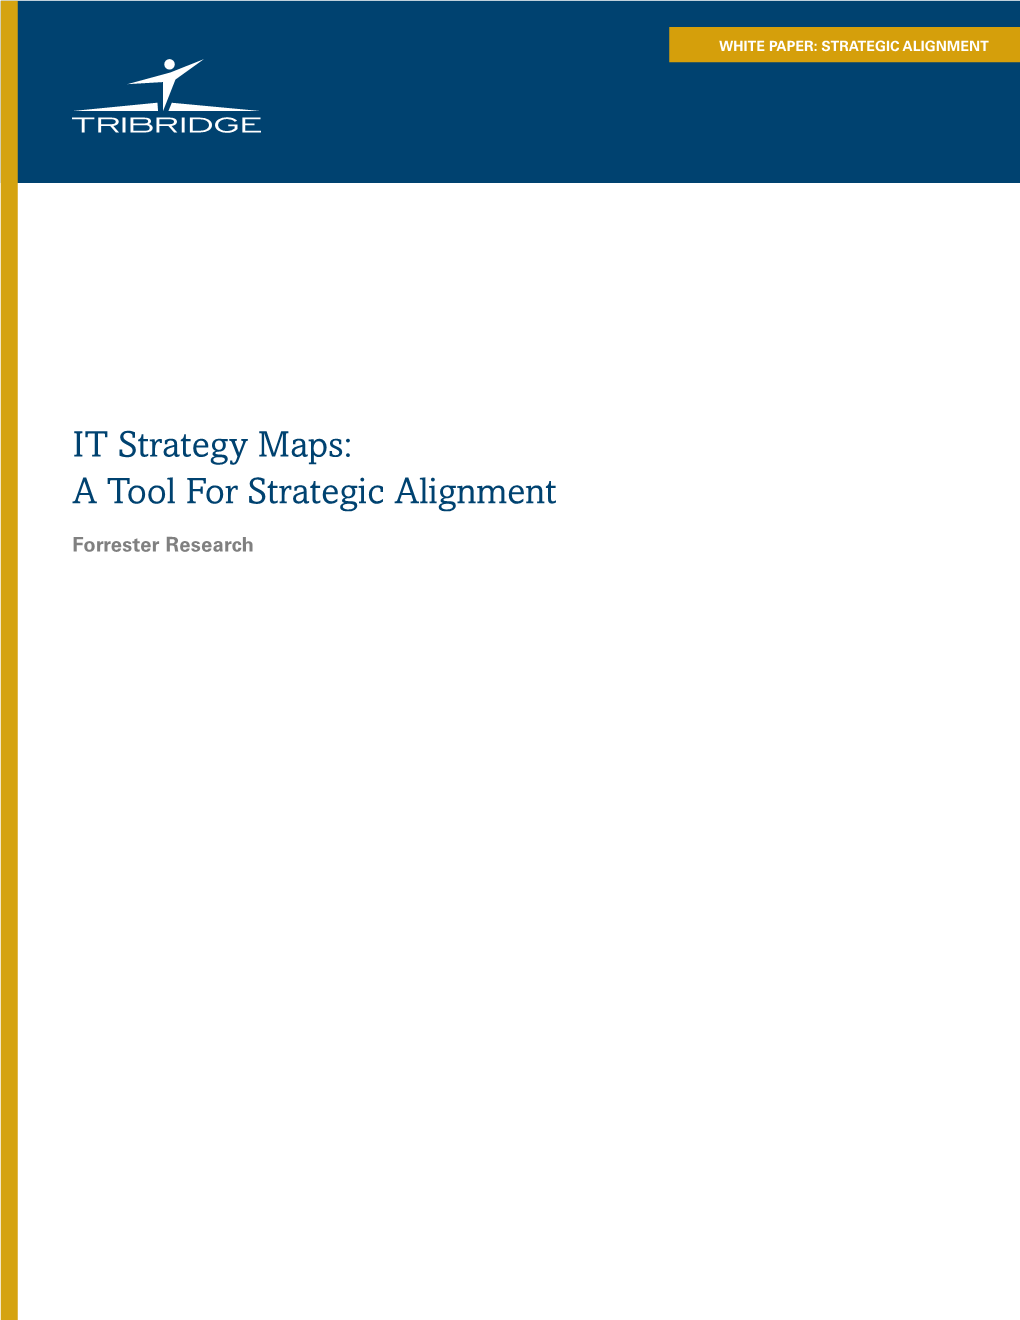 IT Strategy Maps: a Tool for Strategic Alignment